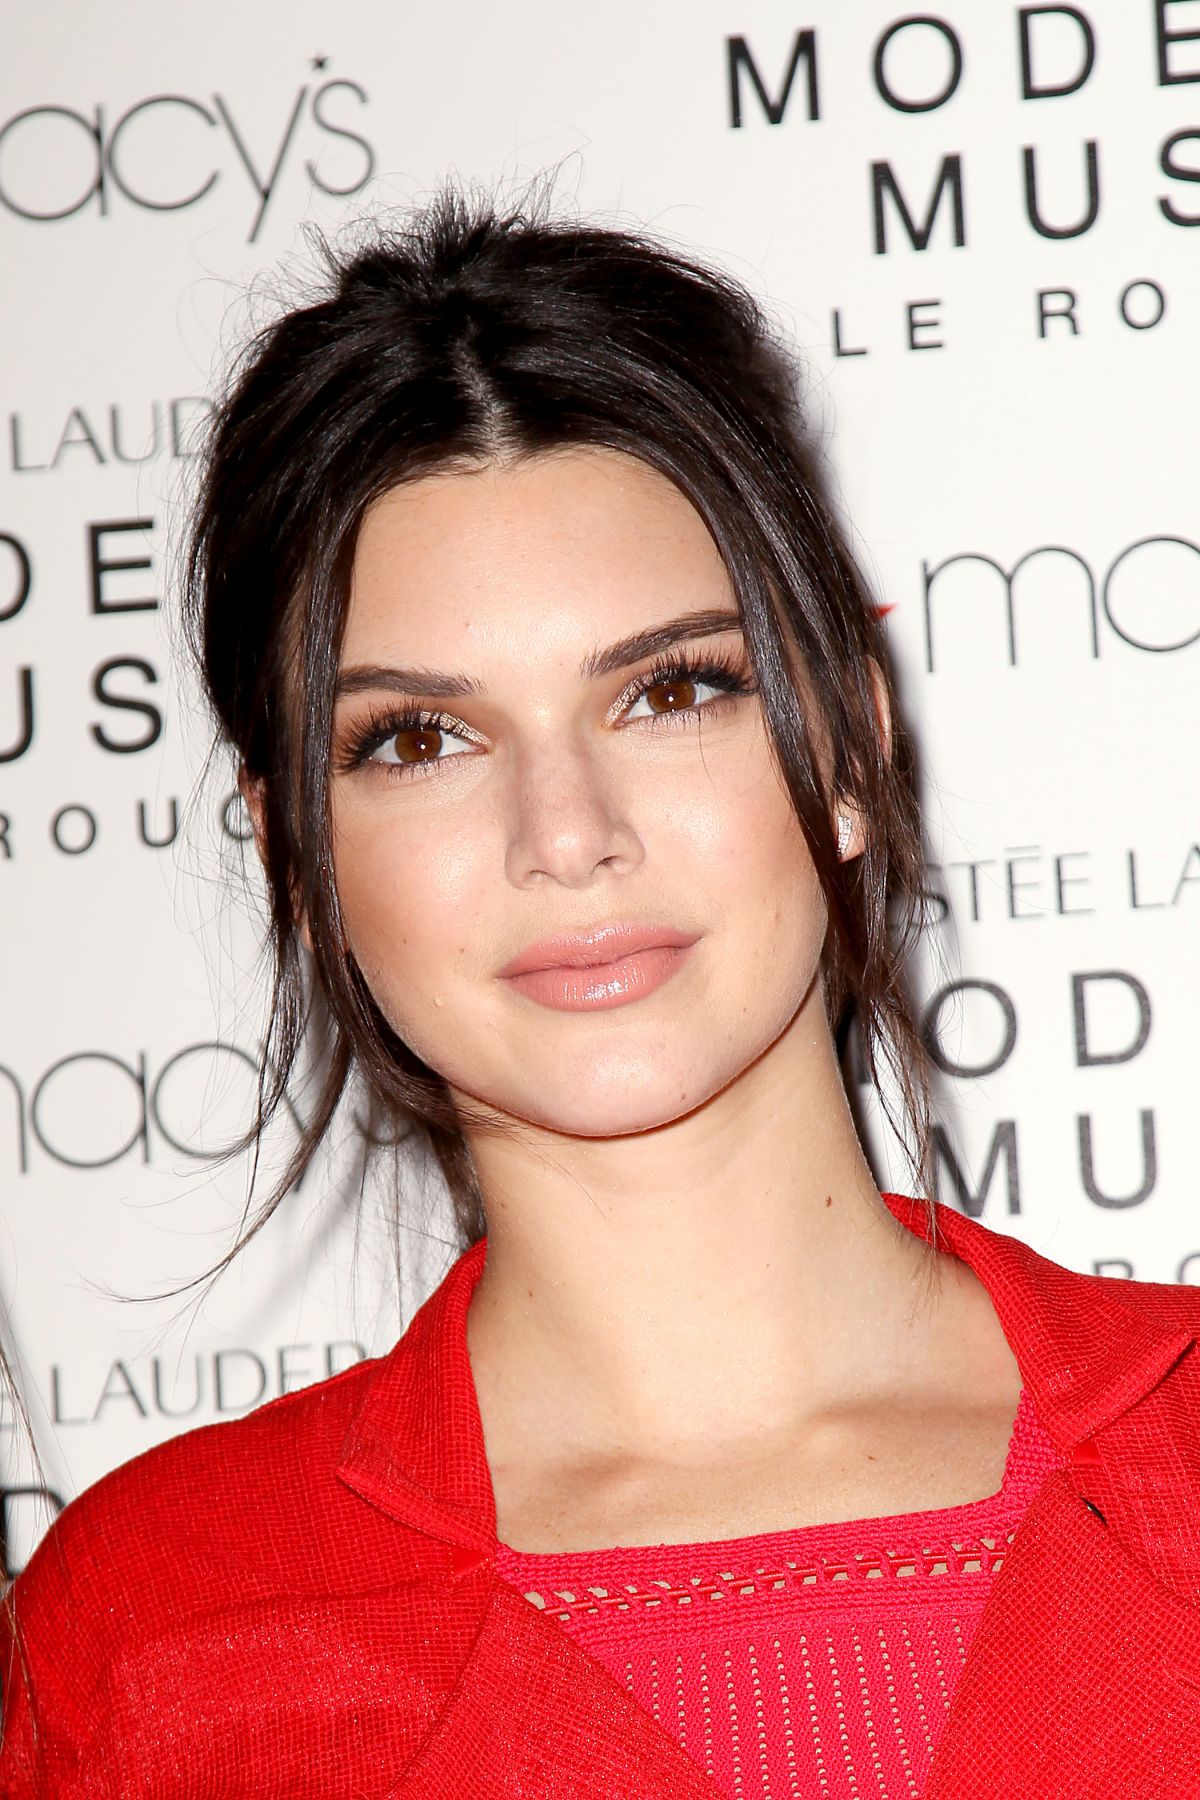 KENDALL JENNER at Modern Muse Le Rouge Perfume Launch in New York 09/18 ...